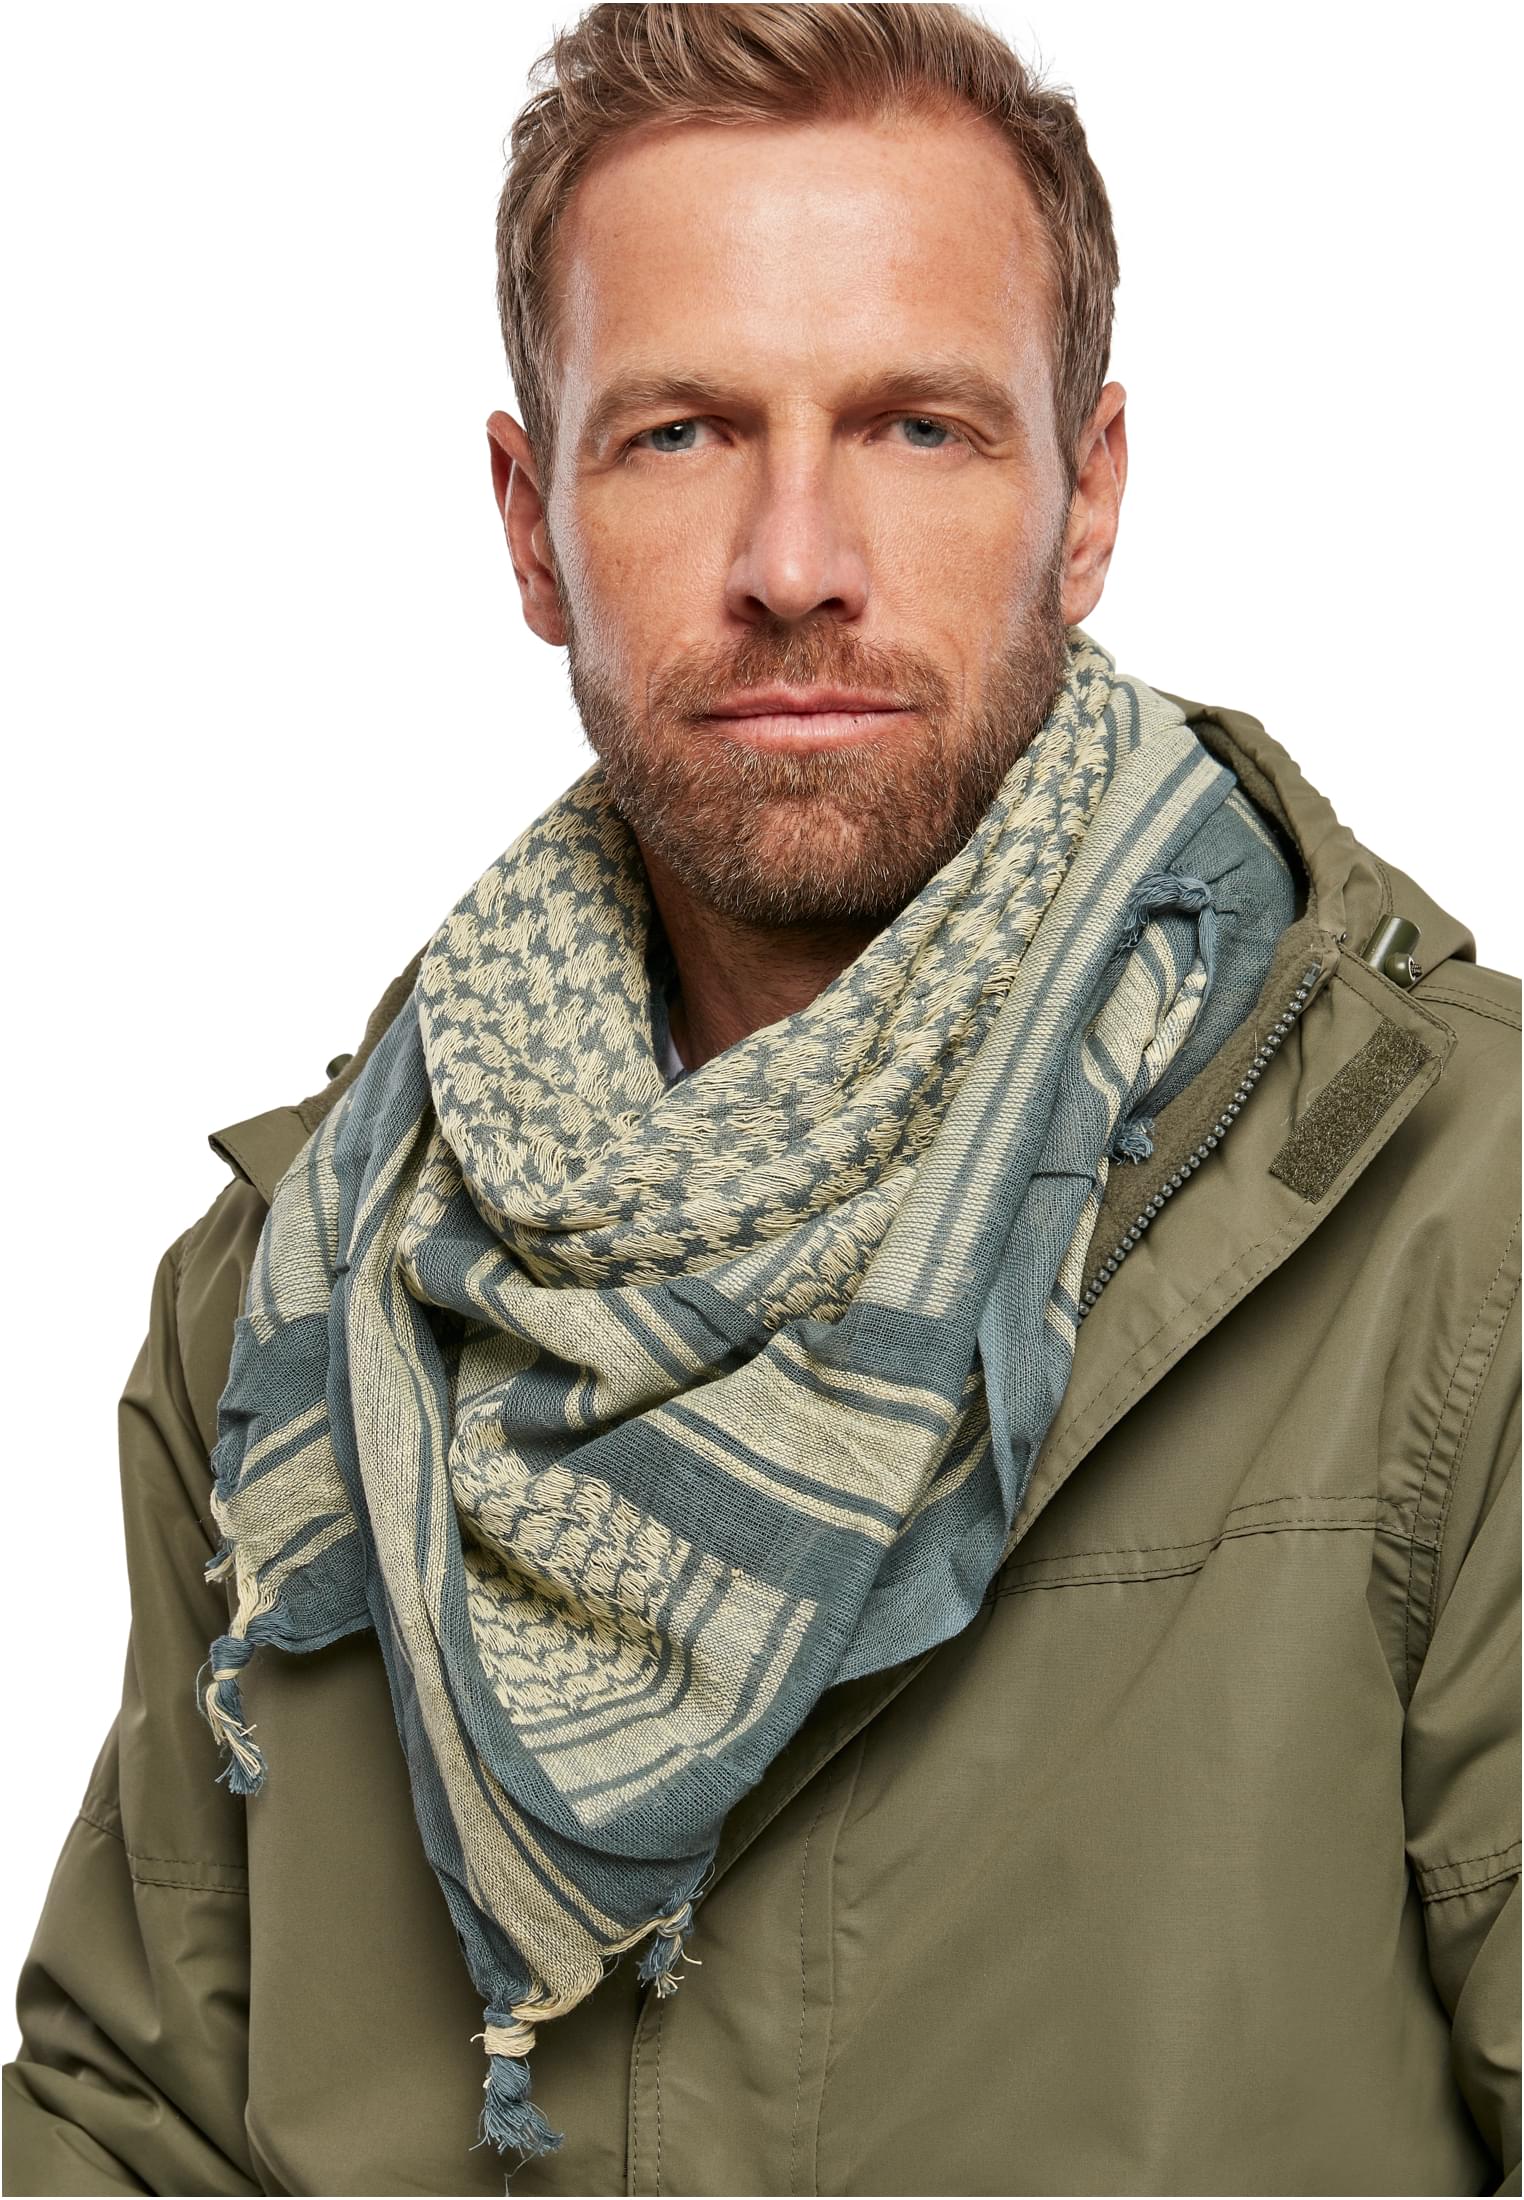 Accessoires Shemag Scarf in Farbe petrol/khaki